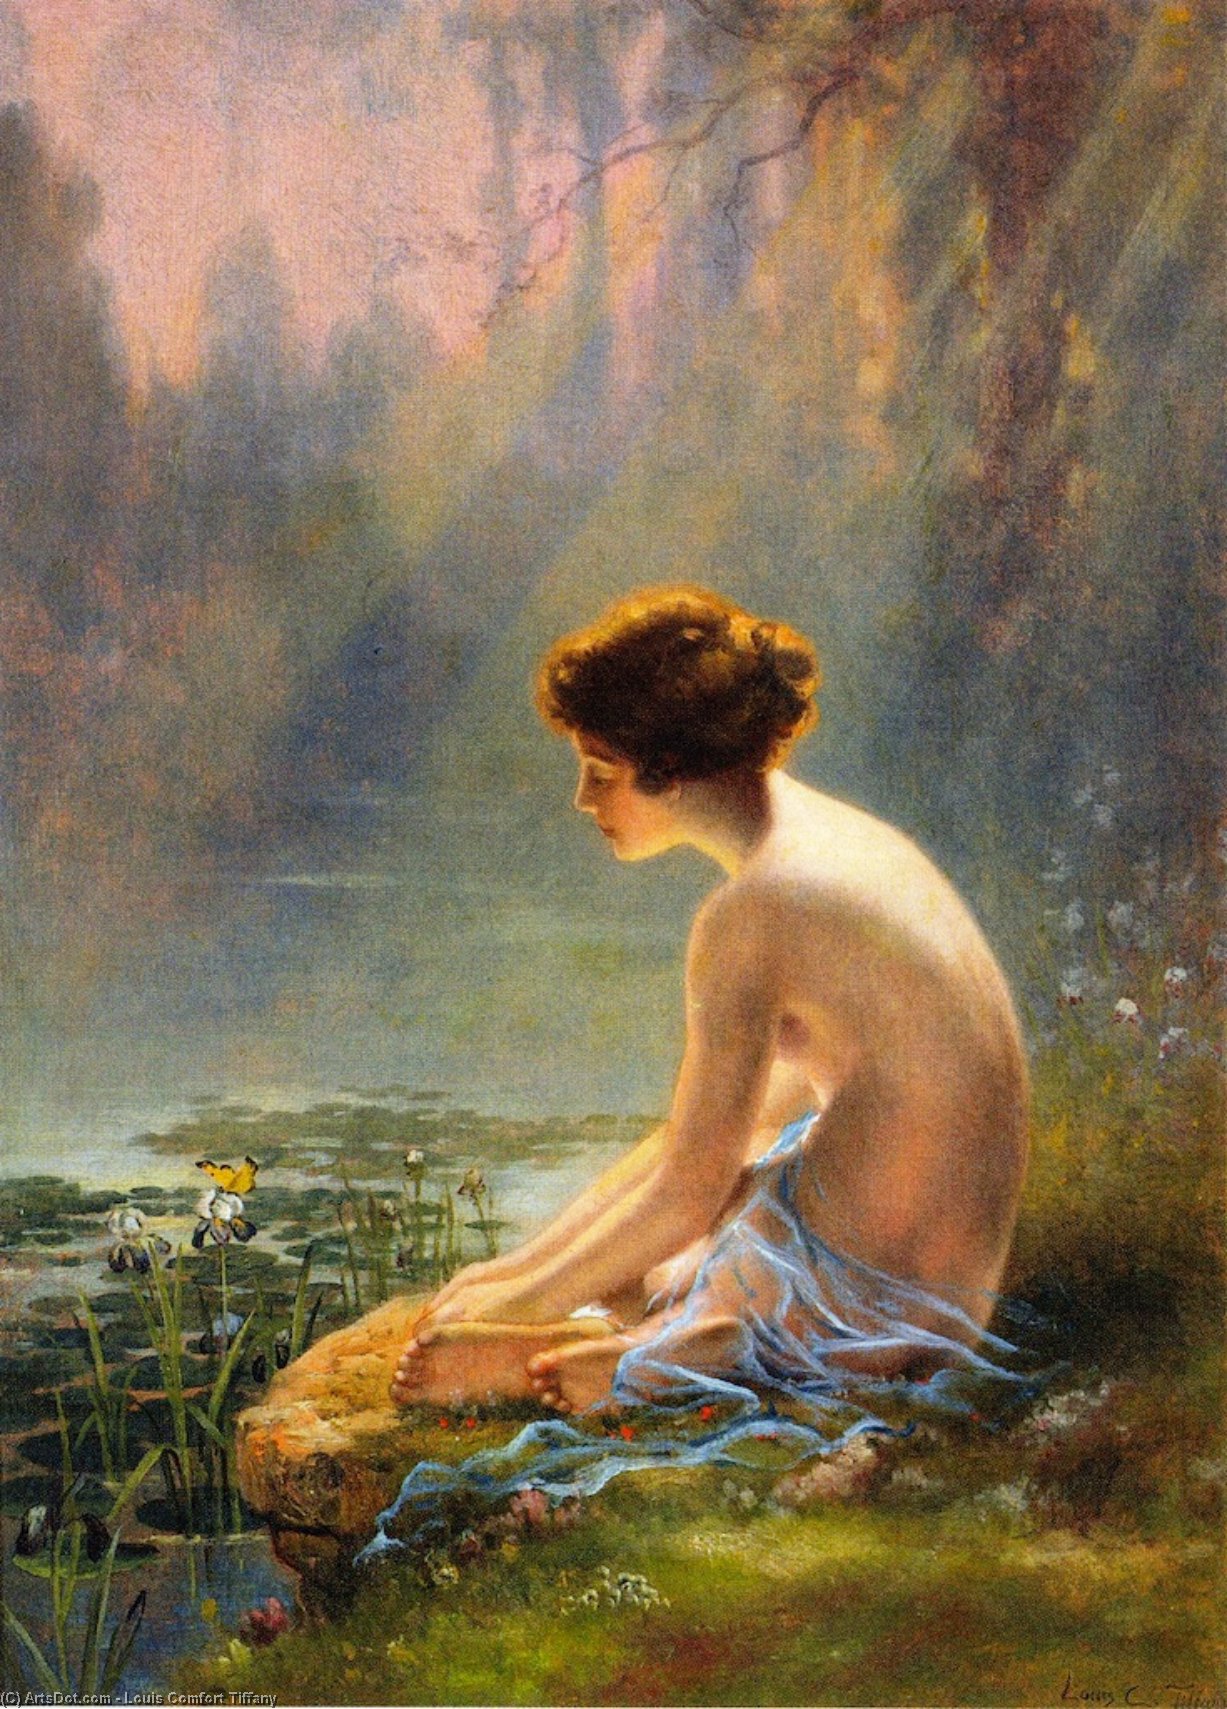 Order Oil Painting Replica Seated Nude at Lily Pond by Louis Comfort Tiffany (1848-1933, United States) | ArtsDot.com